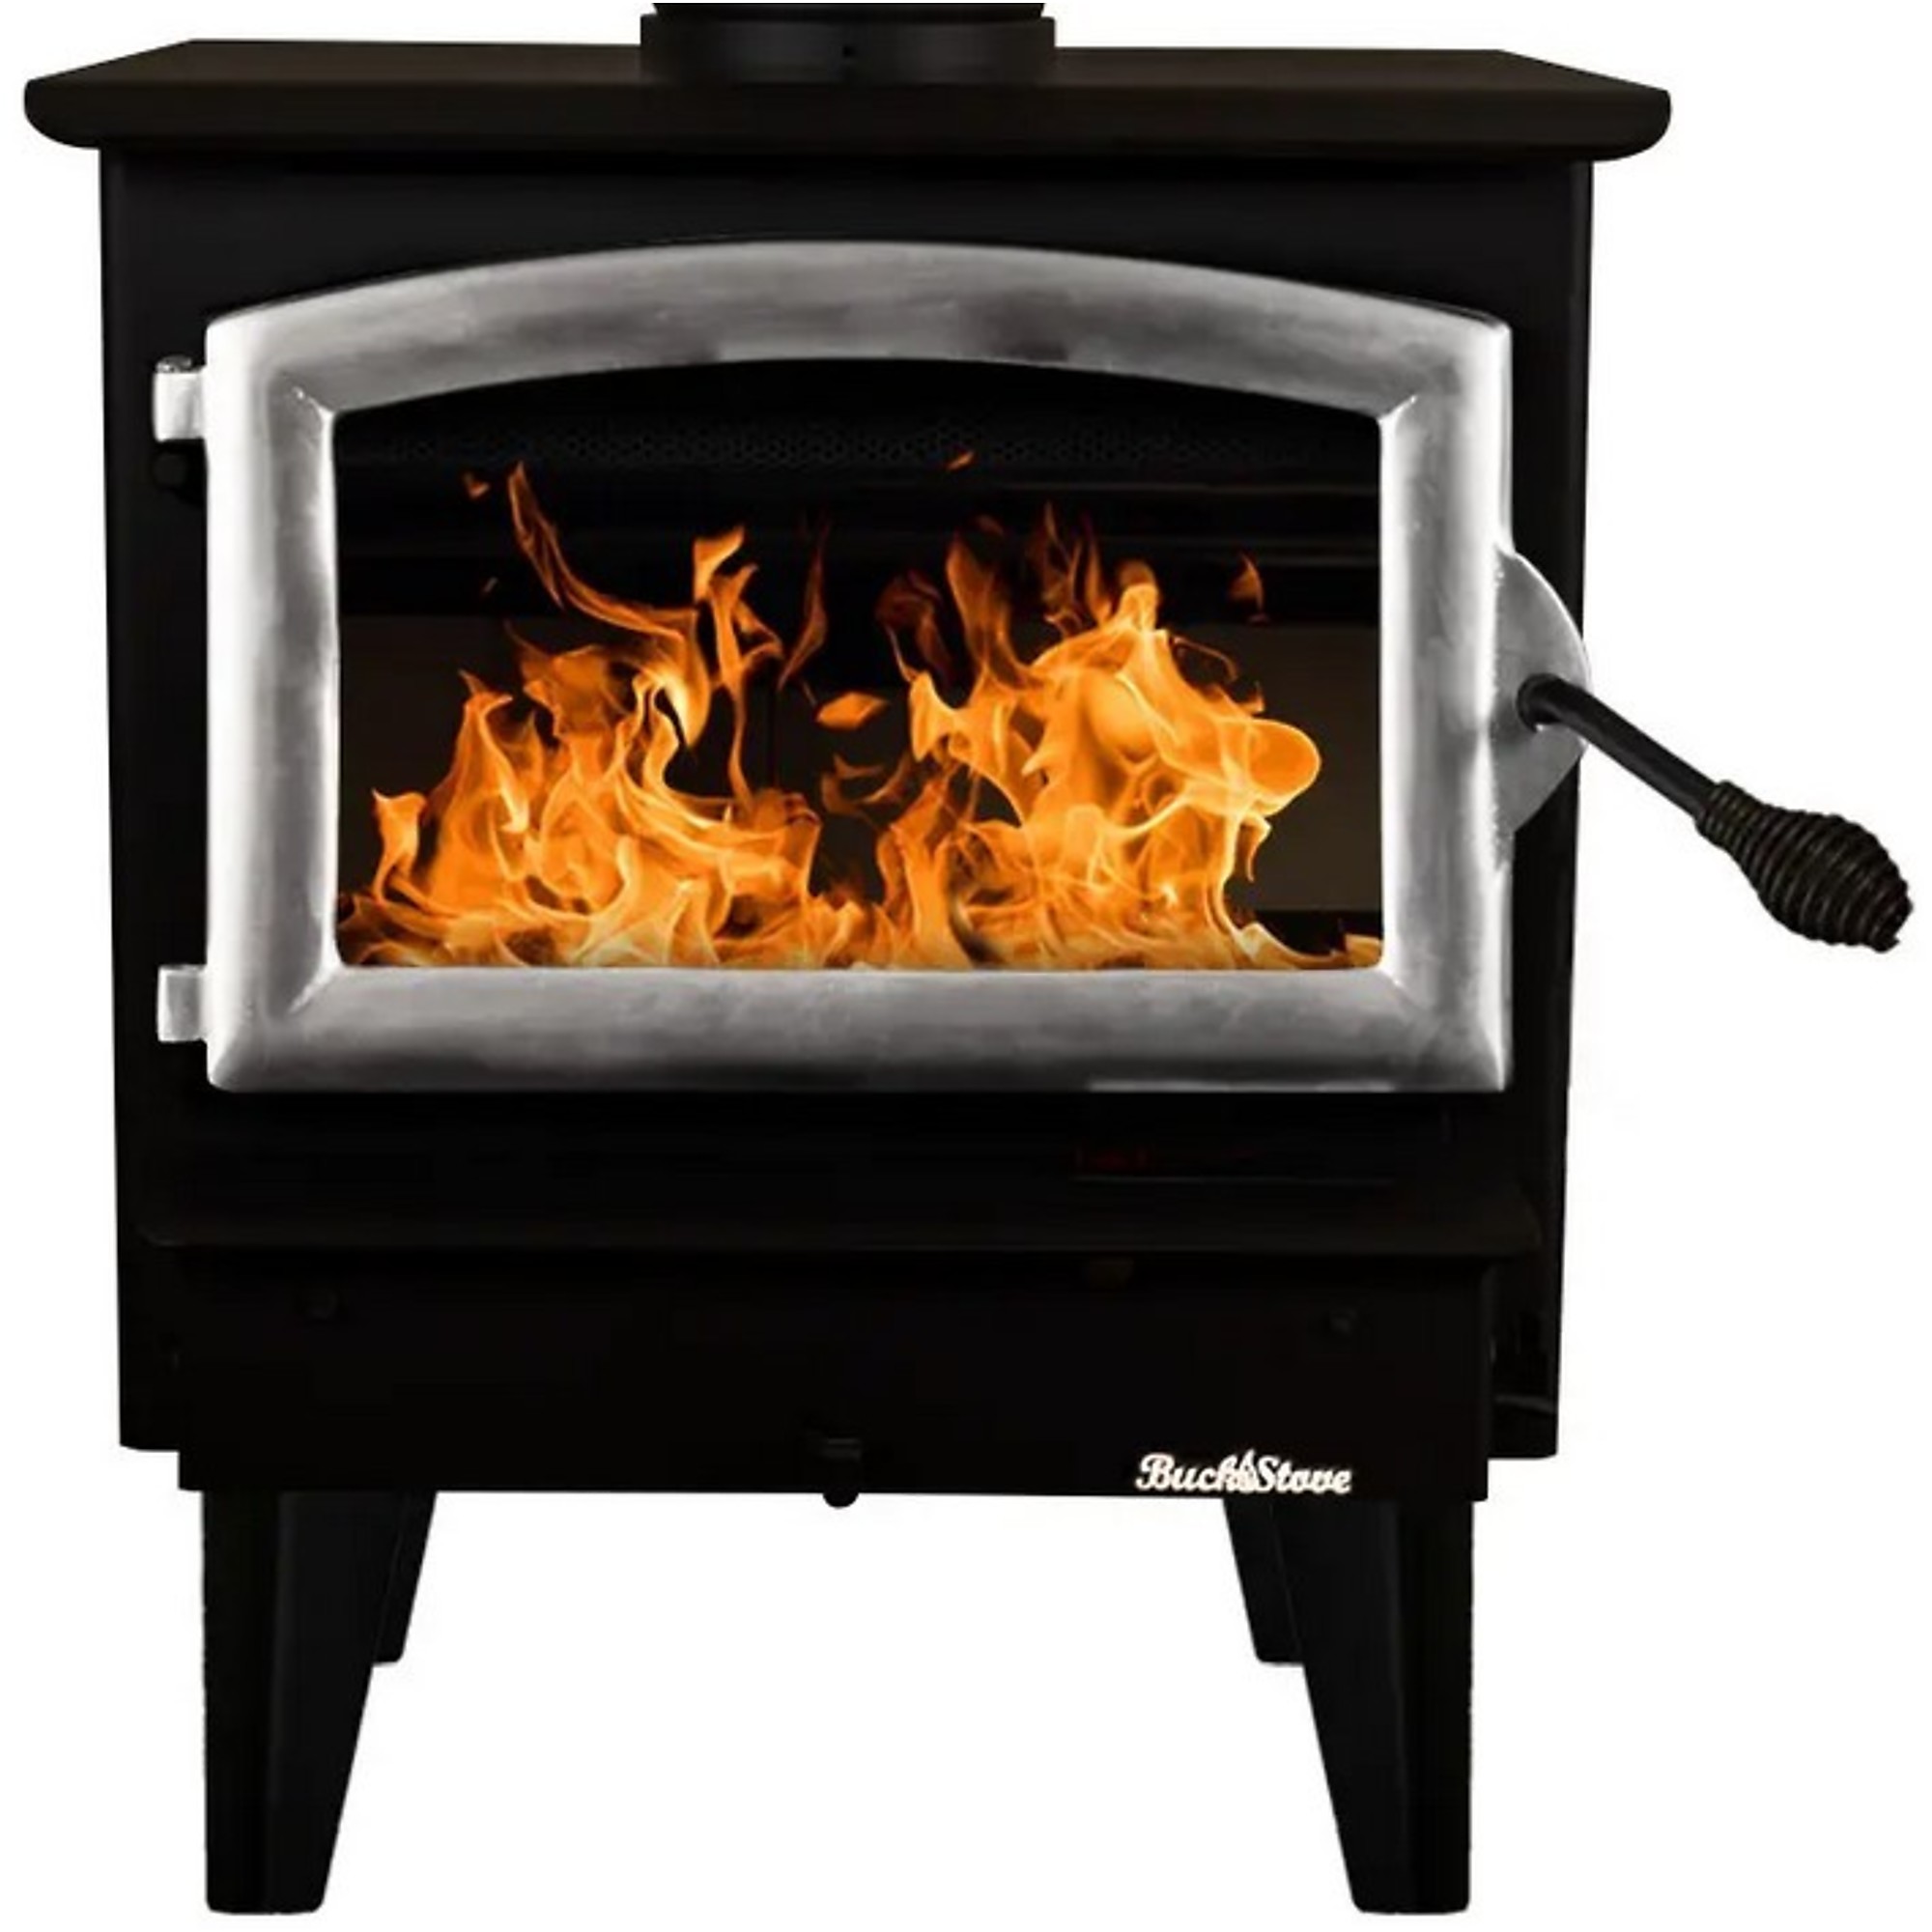 Buck, Wood Stove with Pewter Door and Blower, Heat Output 28901 Btu/hour, Heating Capability 1800 ftÂ², Model FP 21PSLL